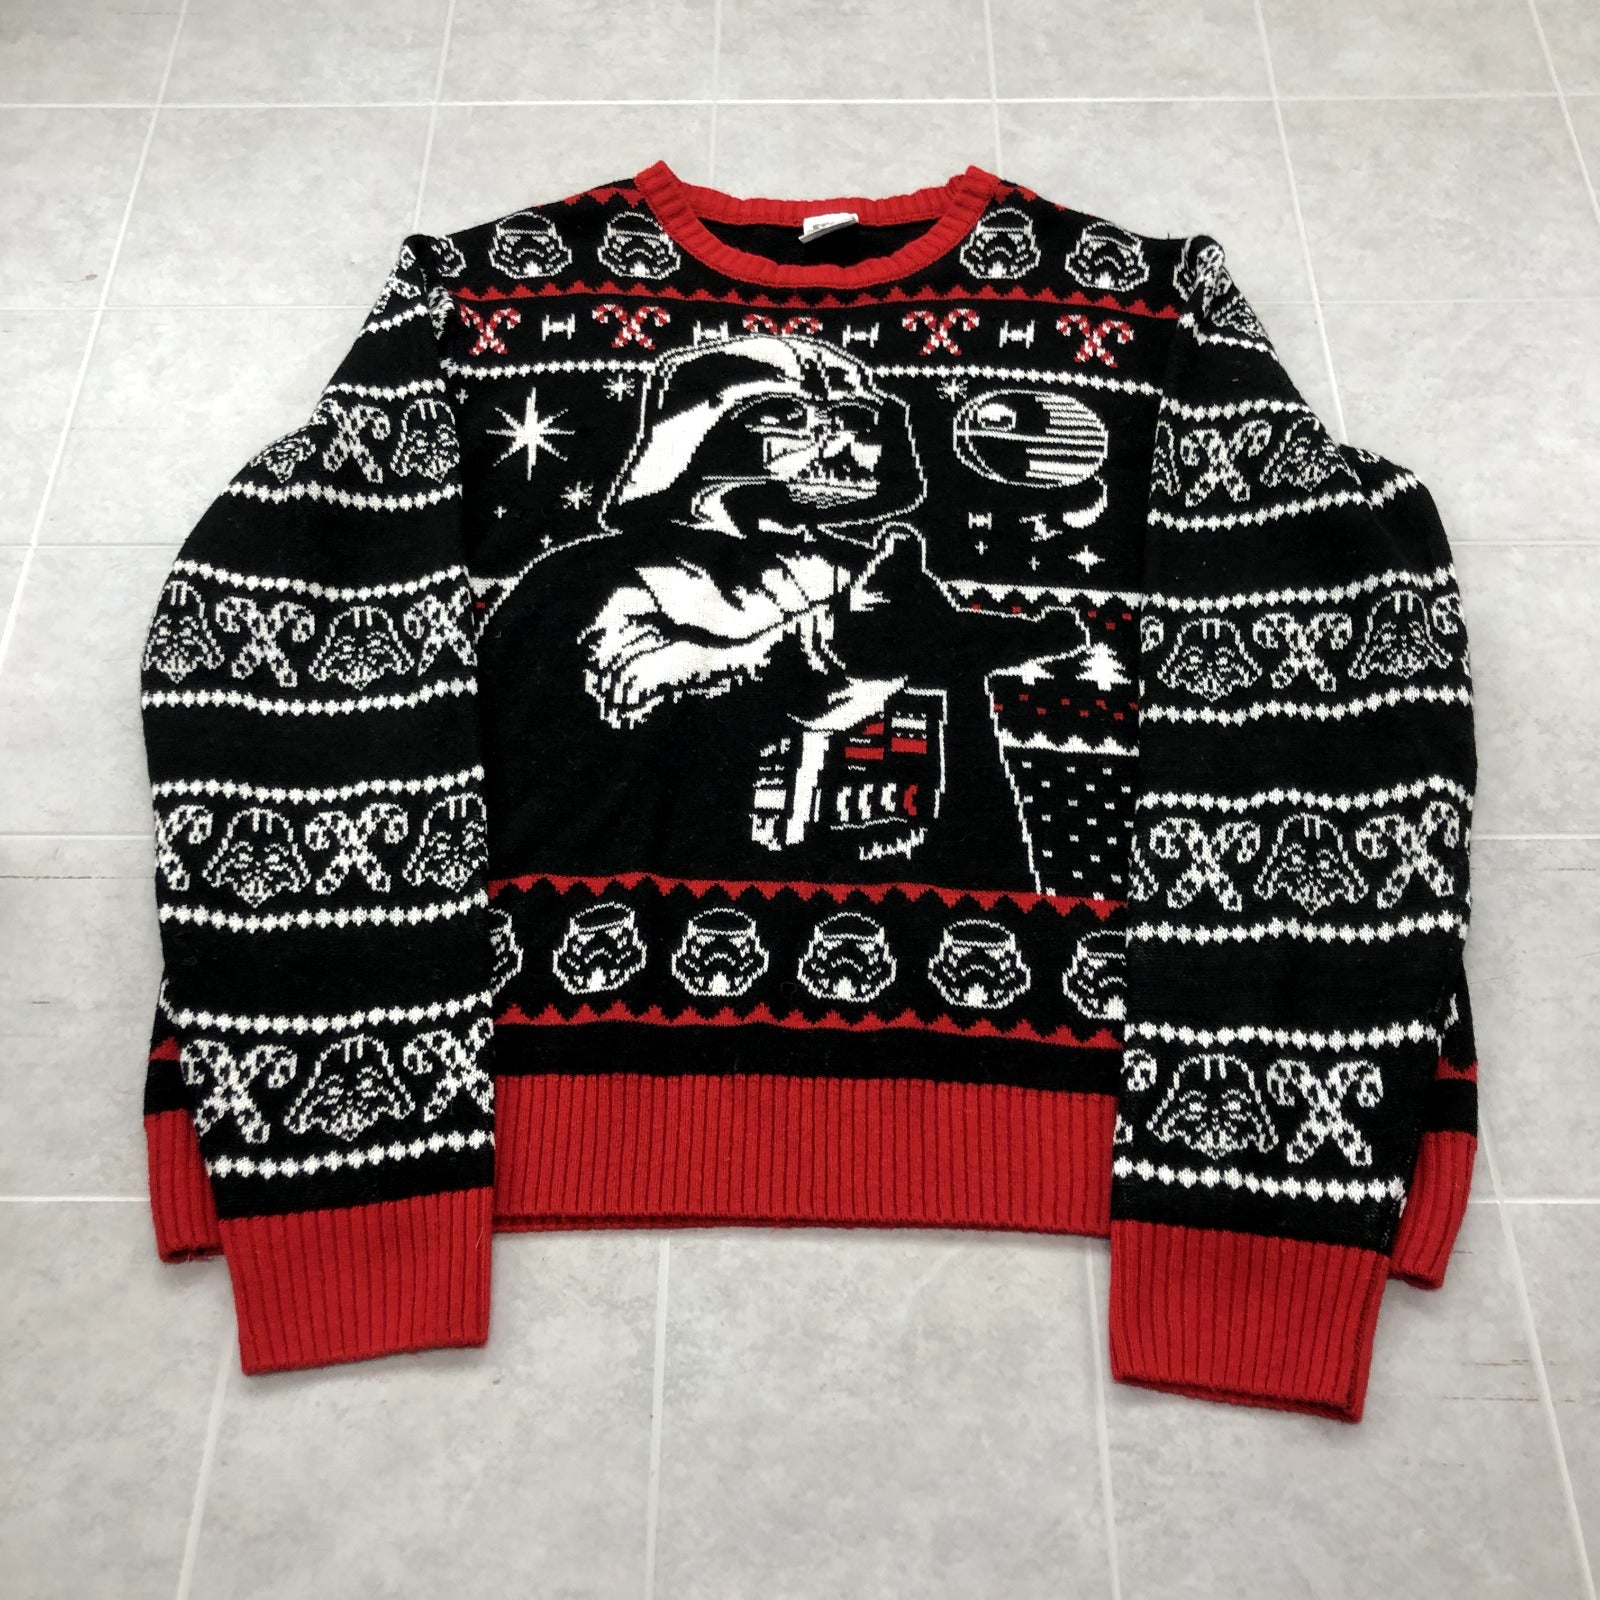 Star Wars Black Long Sleeve Crew Knit Holiday Darth Vader Sweater Adult Size 3XL